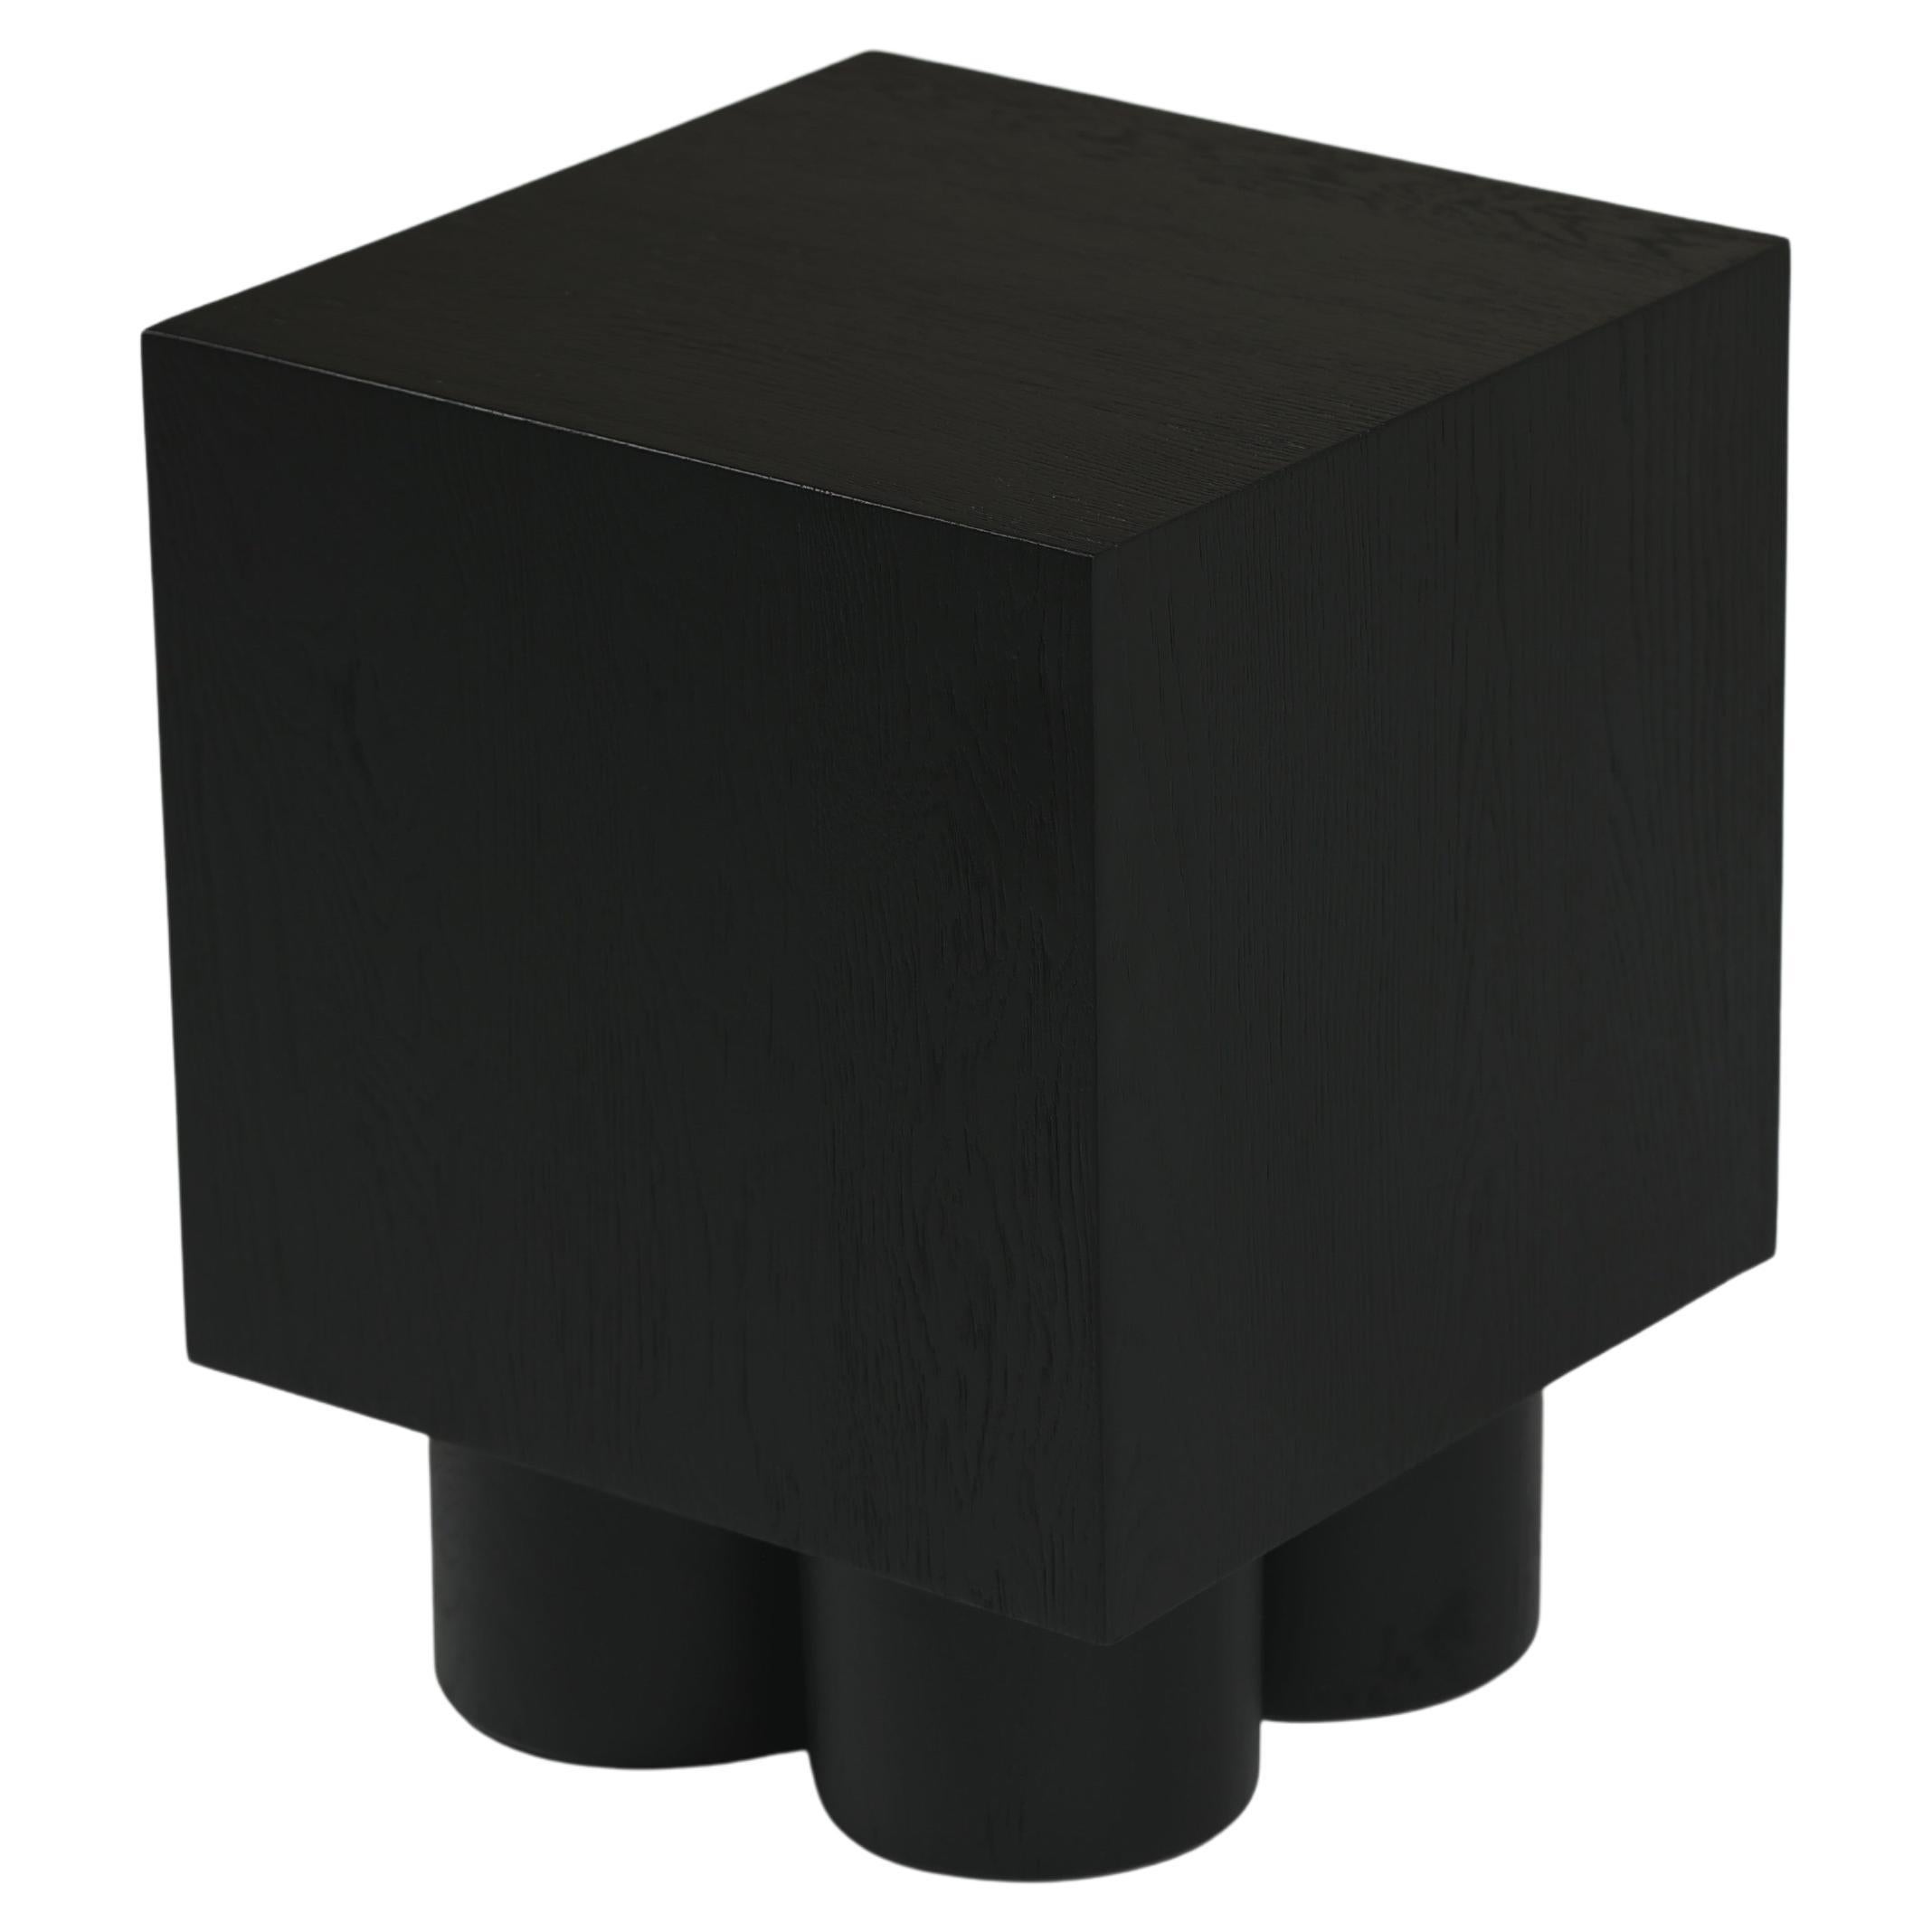 Kimi Side Table/Stool from the Oak Saga Collection by Arbore